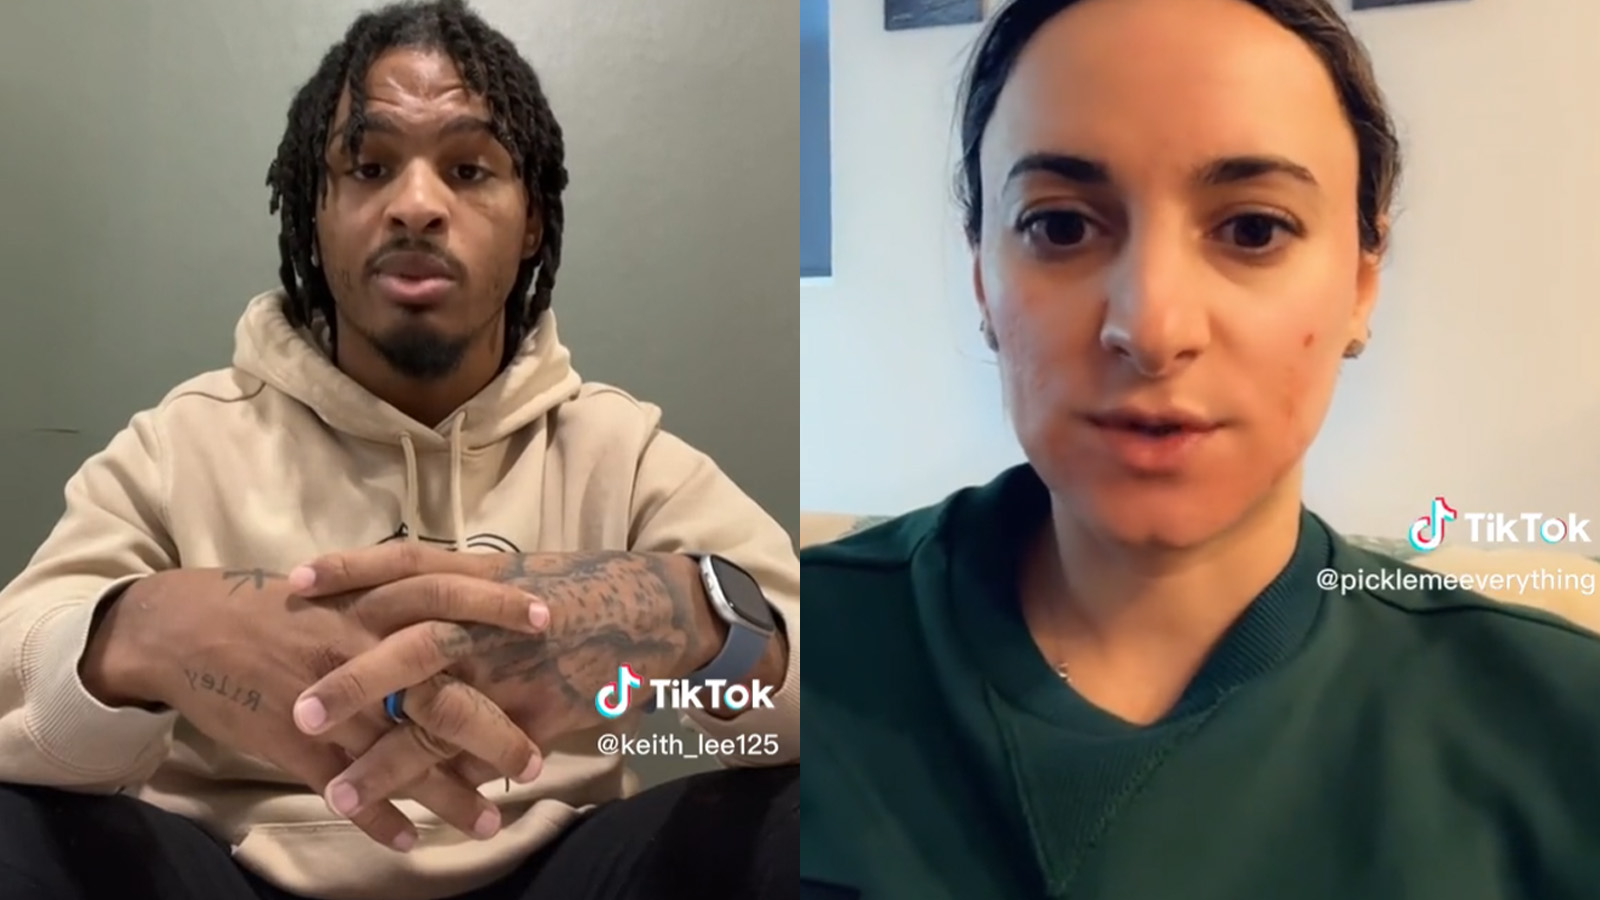 Keith Lee calls out Picklemeeverything on TikTok over alleged unsafe food  practice - Dexerto